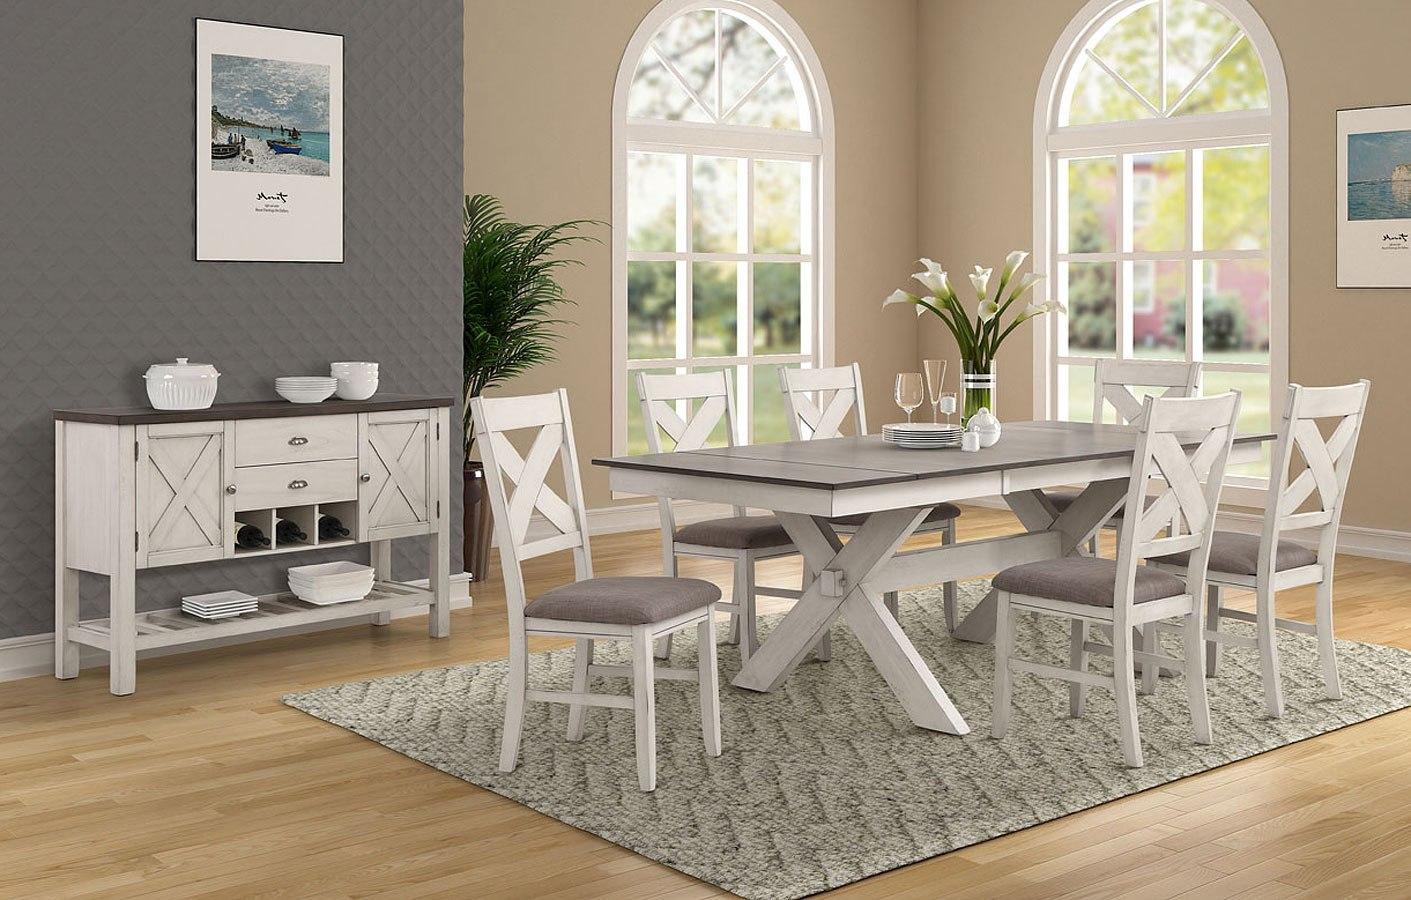 Transitional, Farmhouse Dining Table Set HOMESTEAD 5812-500-Set-8 5812-500-8pcs in White, Brown Fabric